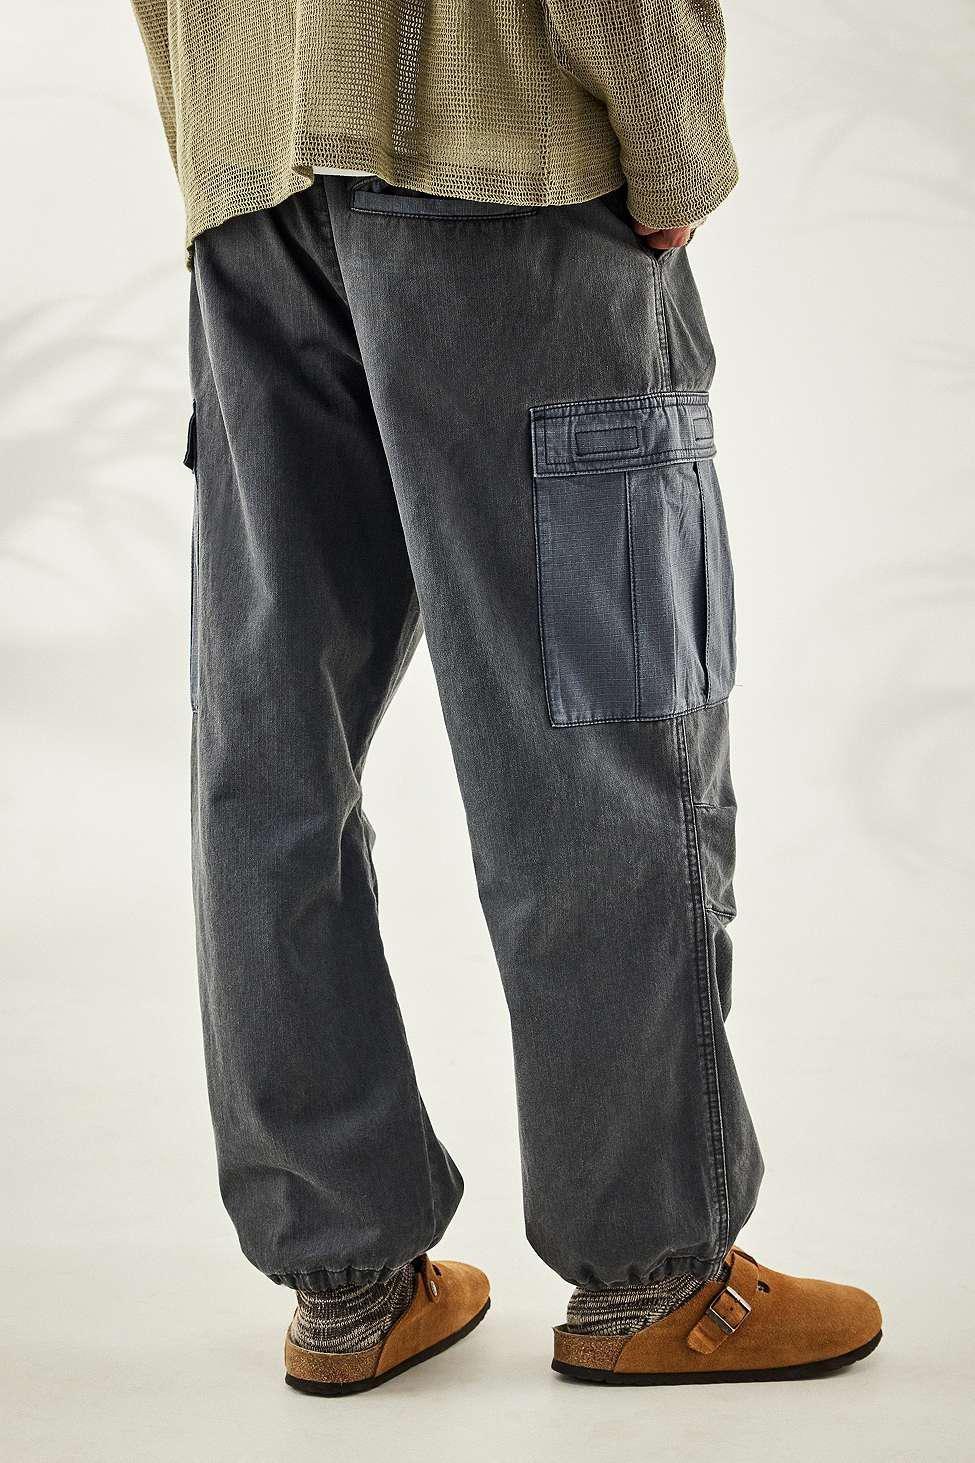 Urban Outfitters - Black Washed Cargo Pants